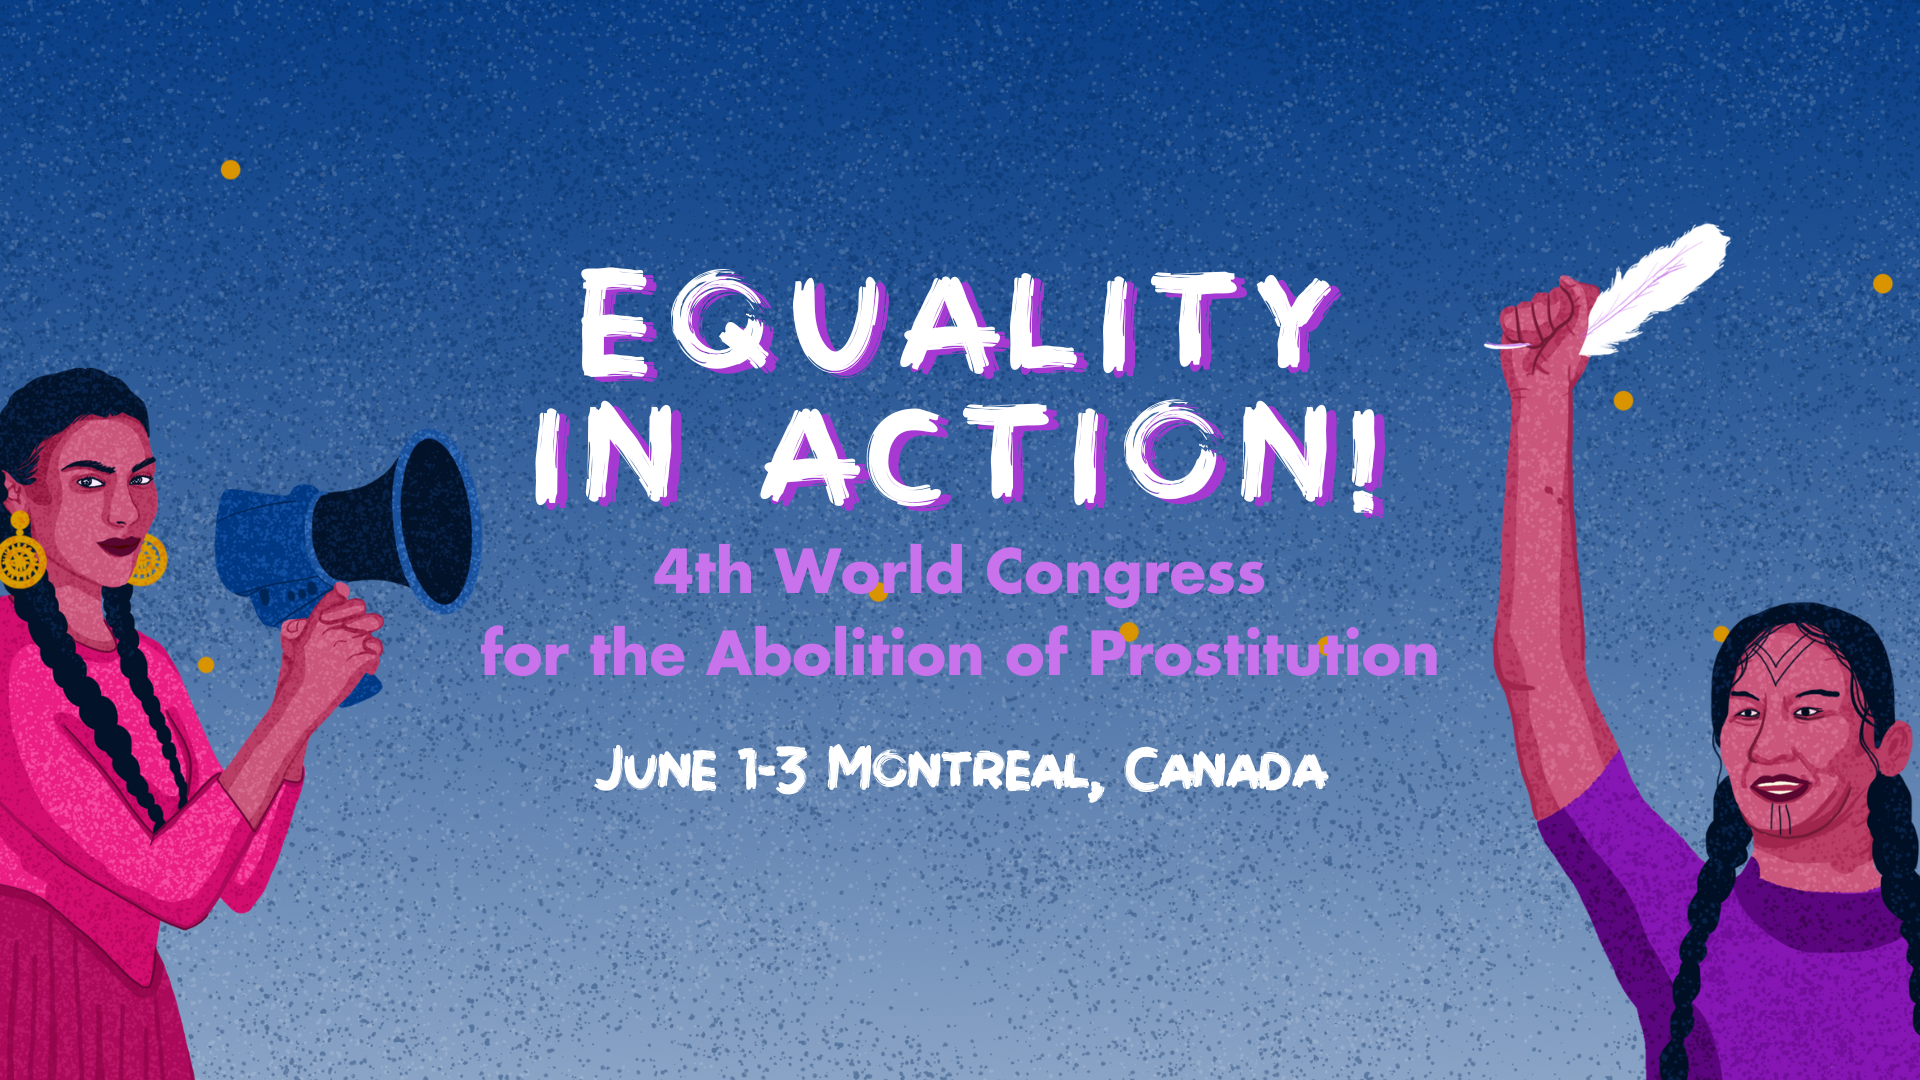 The World Congress for the Abolition of Prostitution is back for a 4th edition!